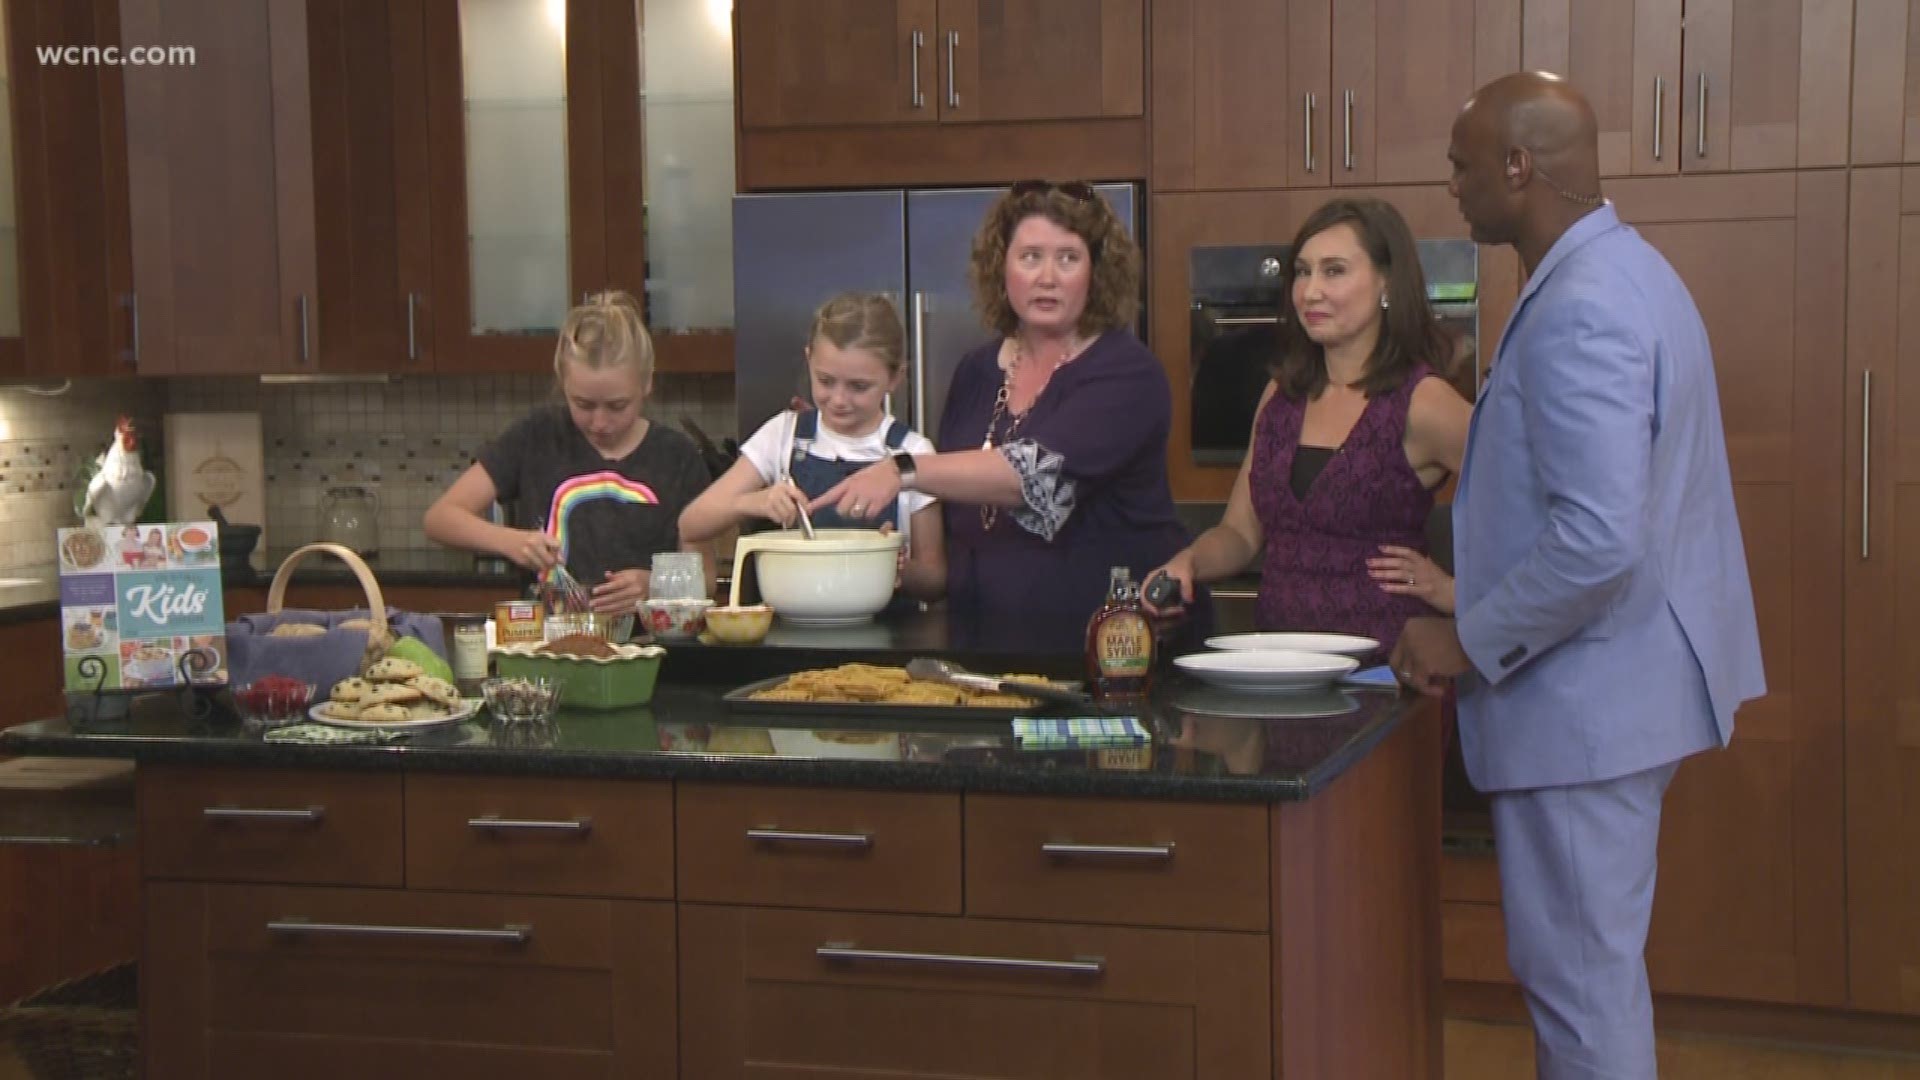 Tiffany Dahle and her kids show us how easy it can be